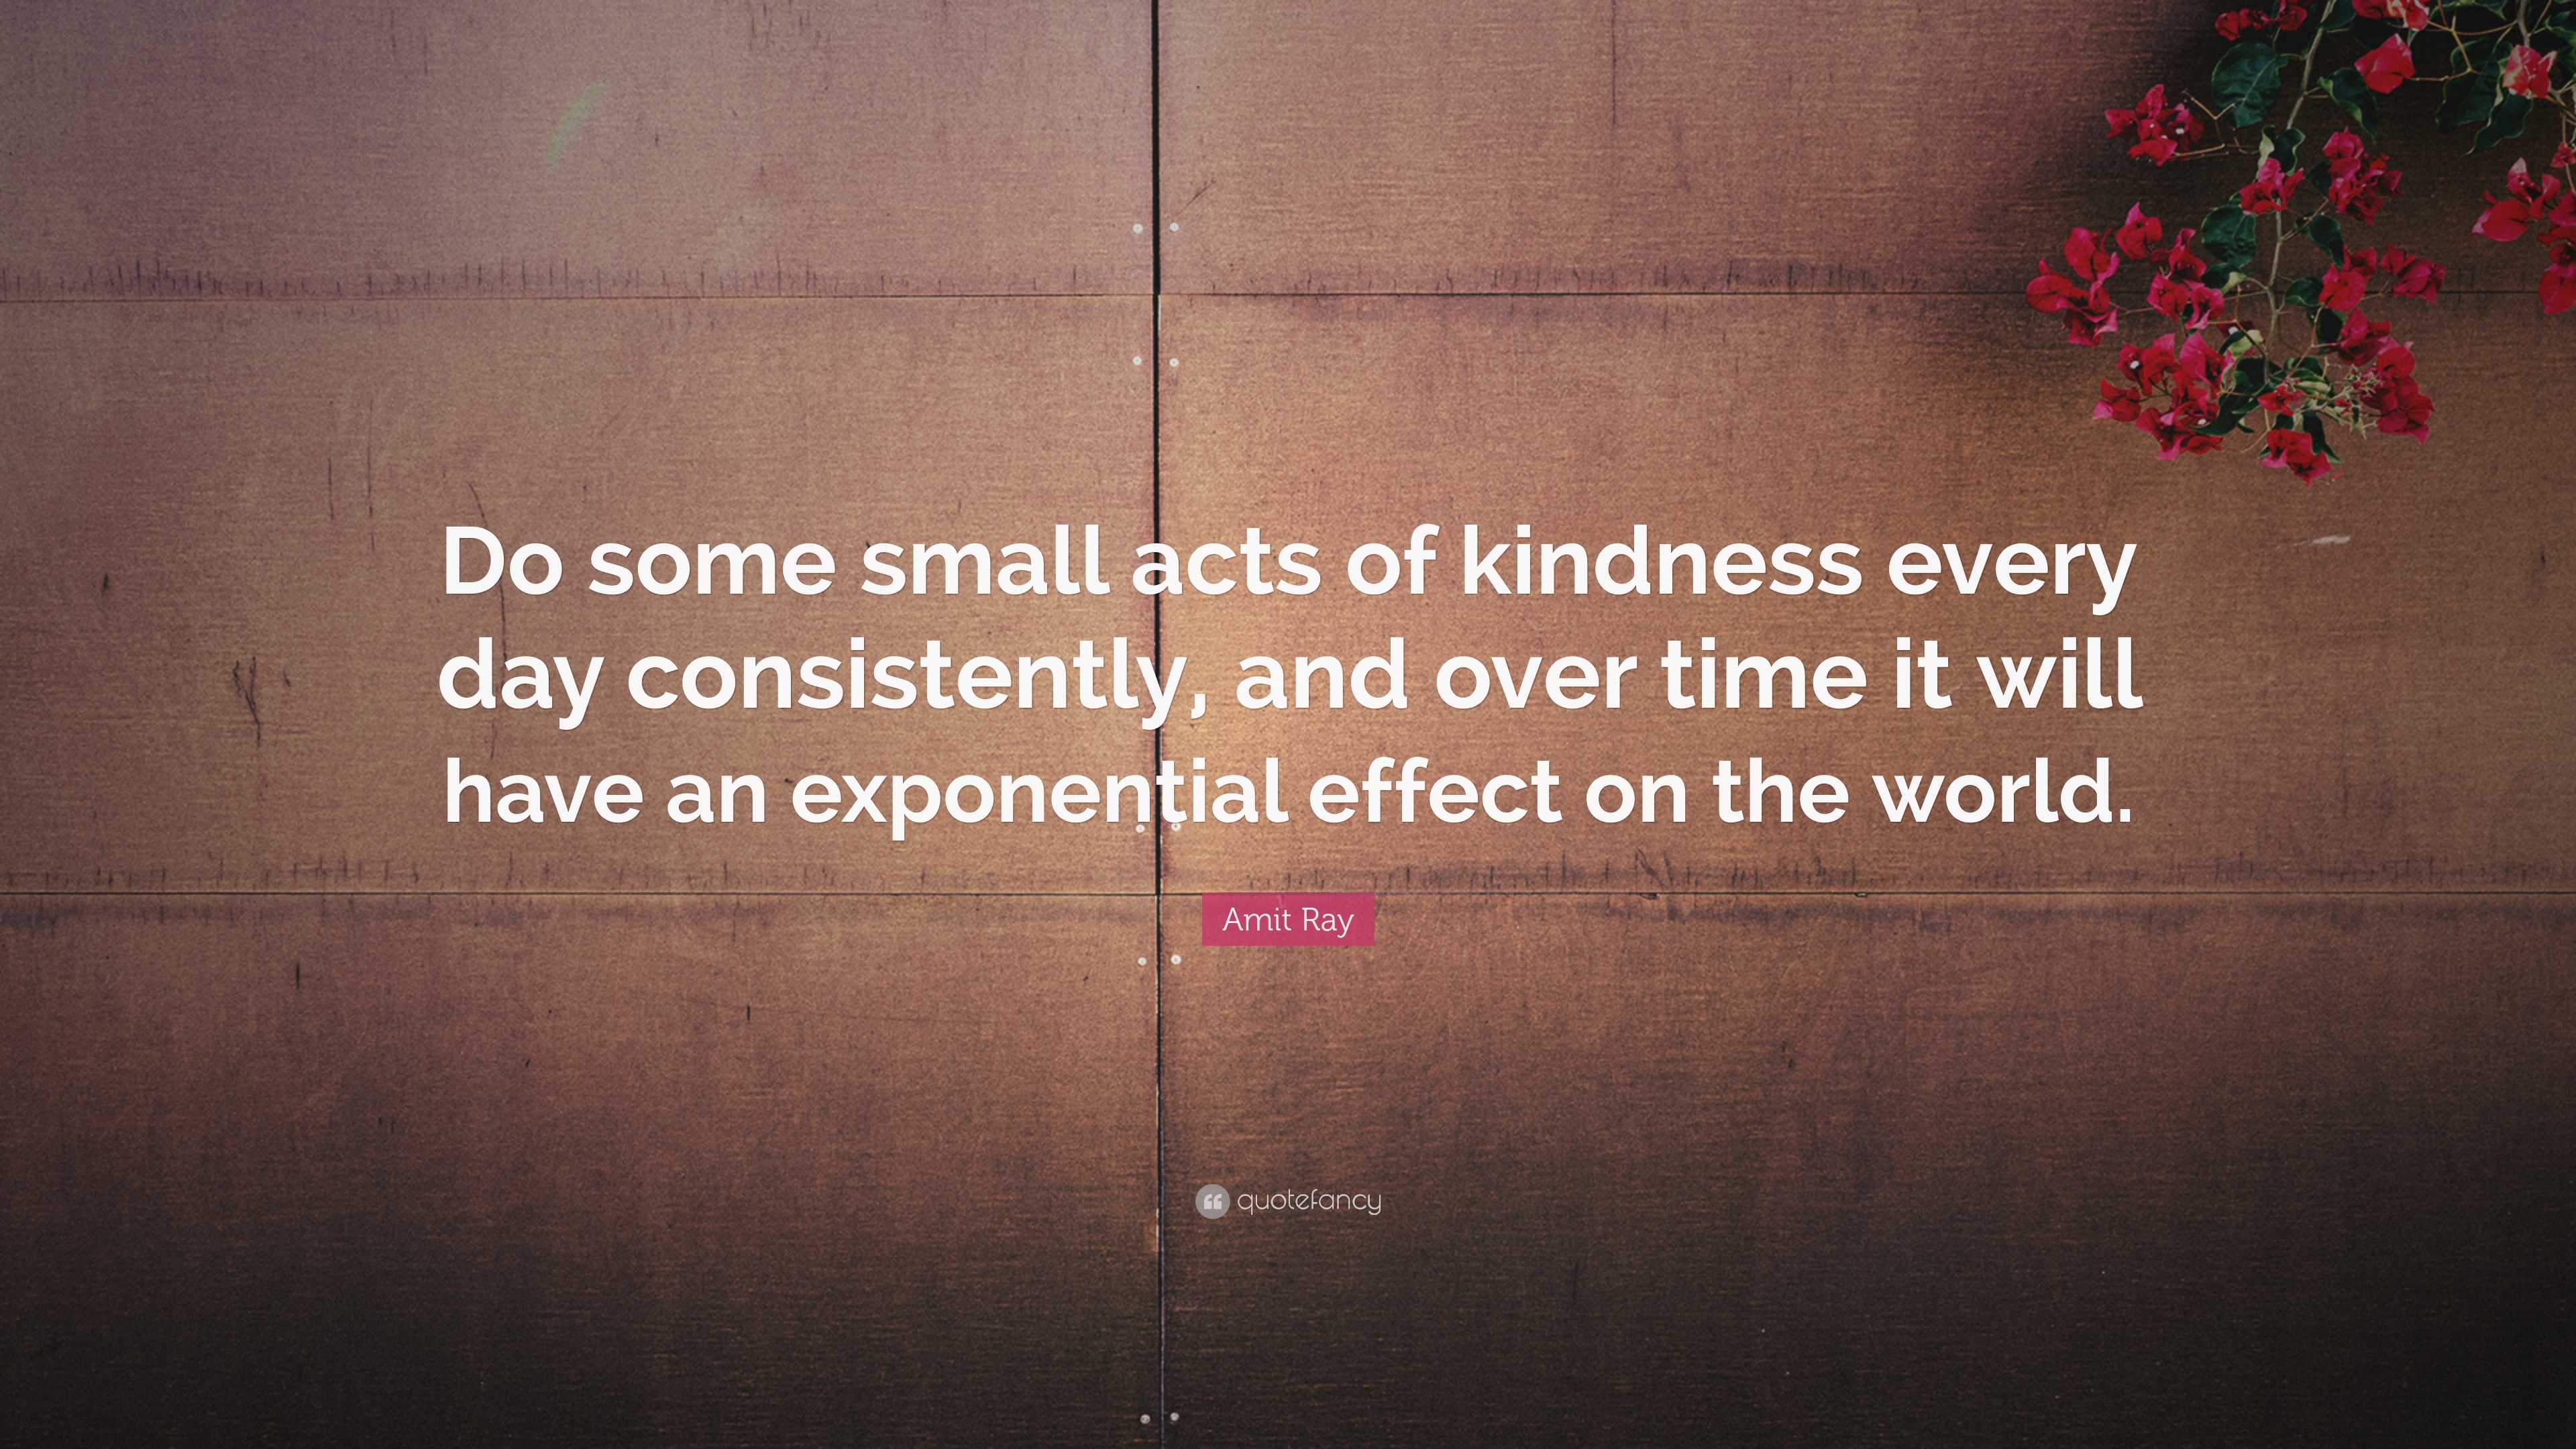 Amit Ray Quote: “Do some small acts of kindness every day consistently ...